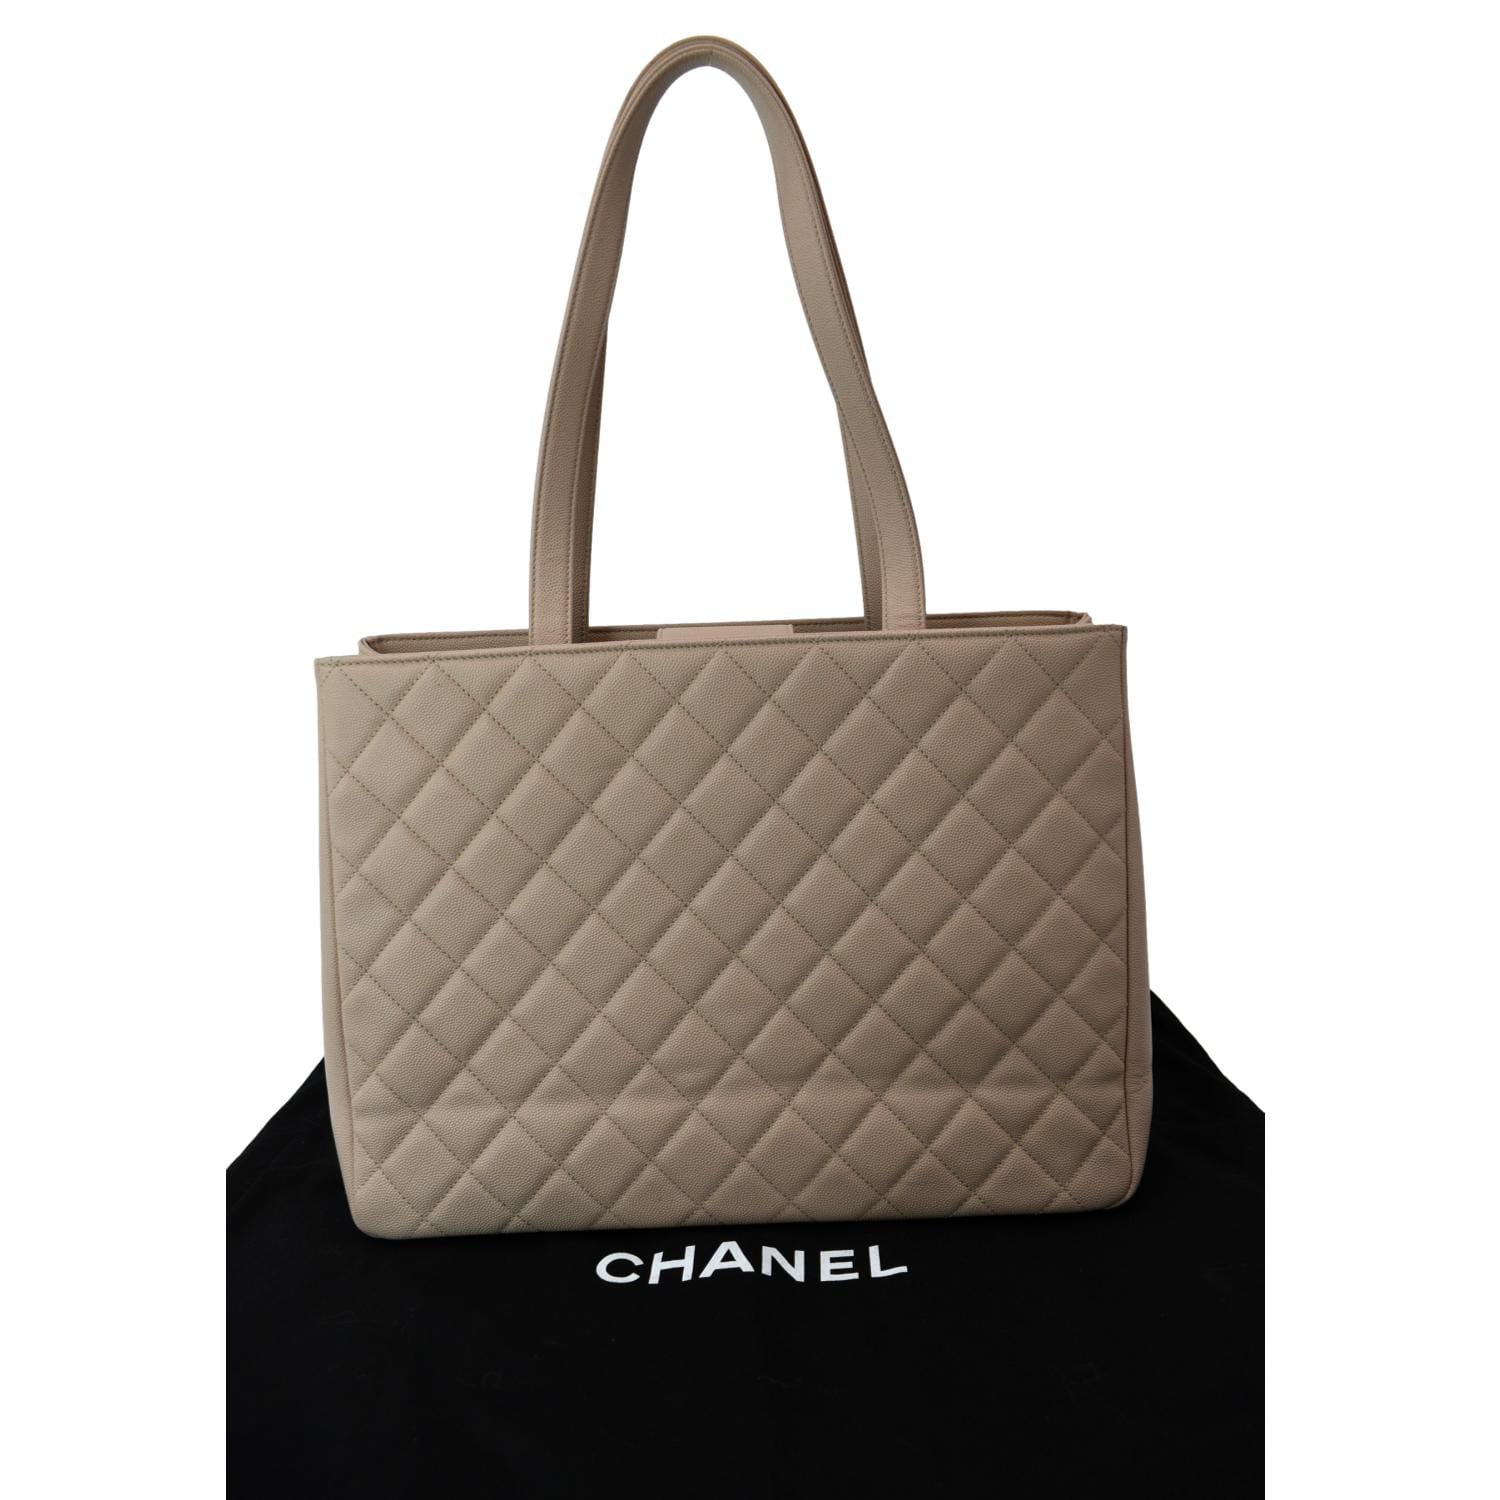 Business Affinity Tote Our Price: $4300 CAD / $3200 USD Color: Beige Size:  11 x 8 x 5.25 Material: Caviar Hardware: Light Gold Serial:…